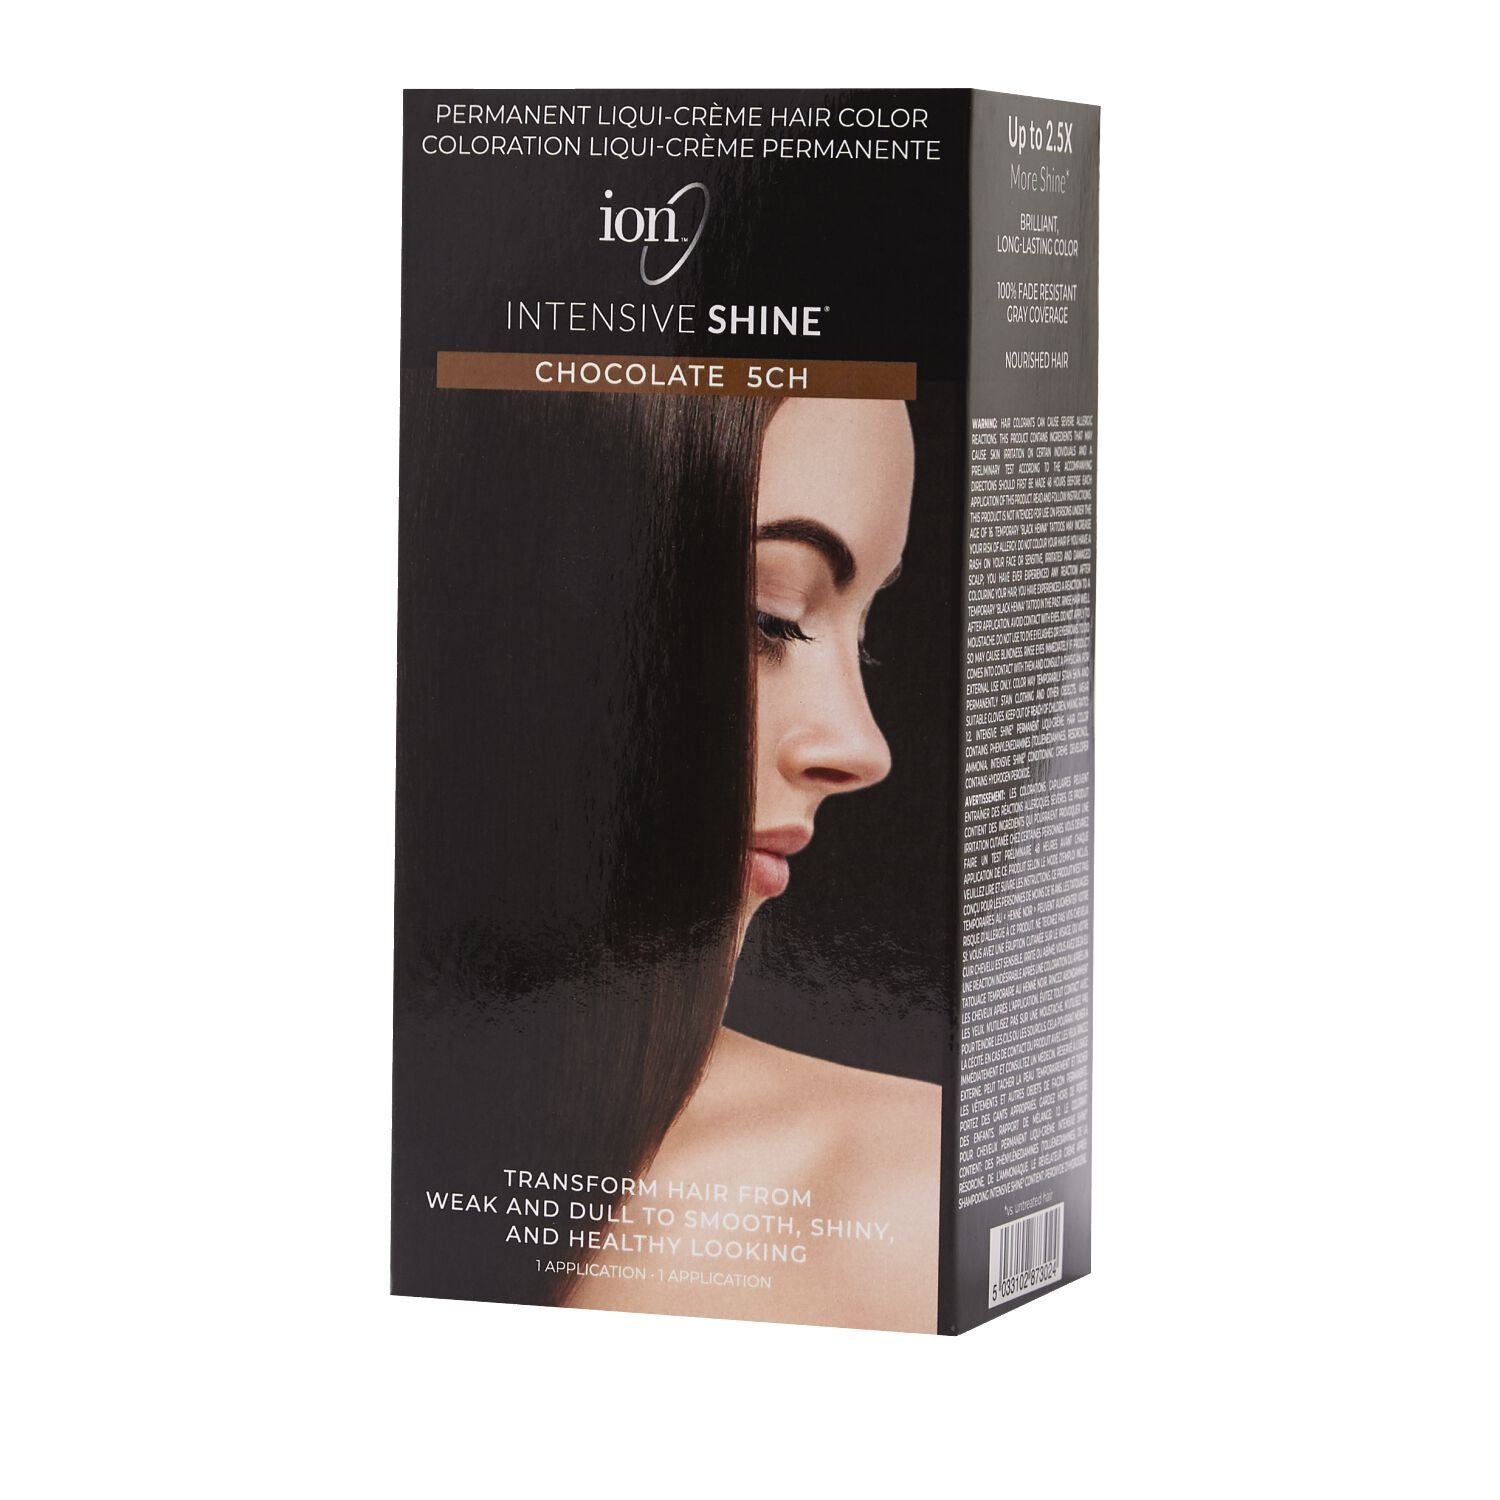 Intensive Shine  by   ion Intensive Shine Hair Color Kit Chocolate 5CH